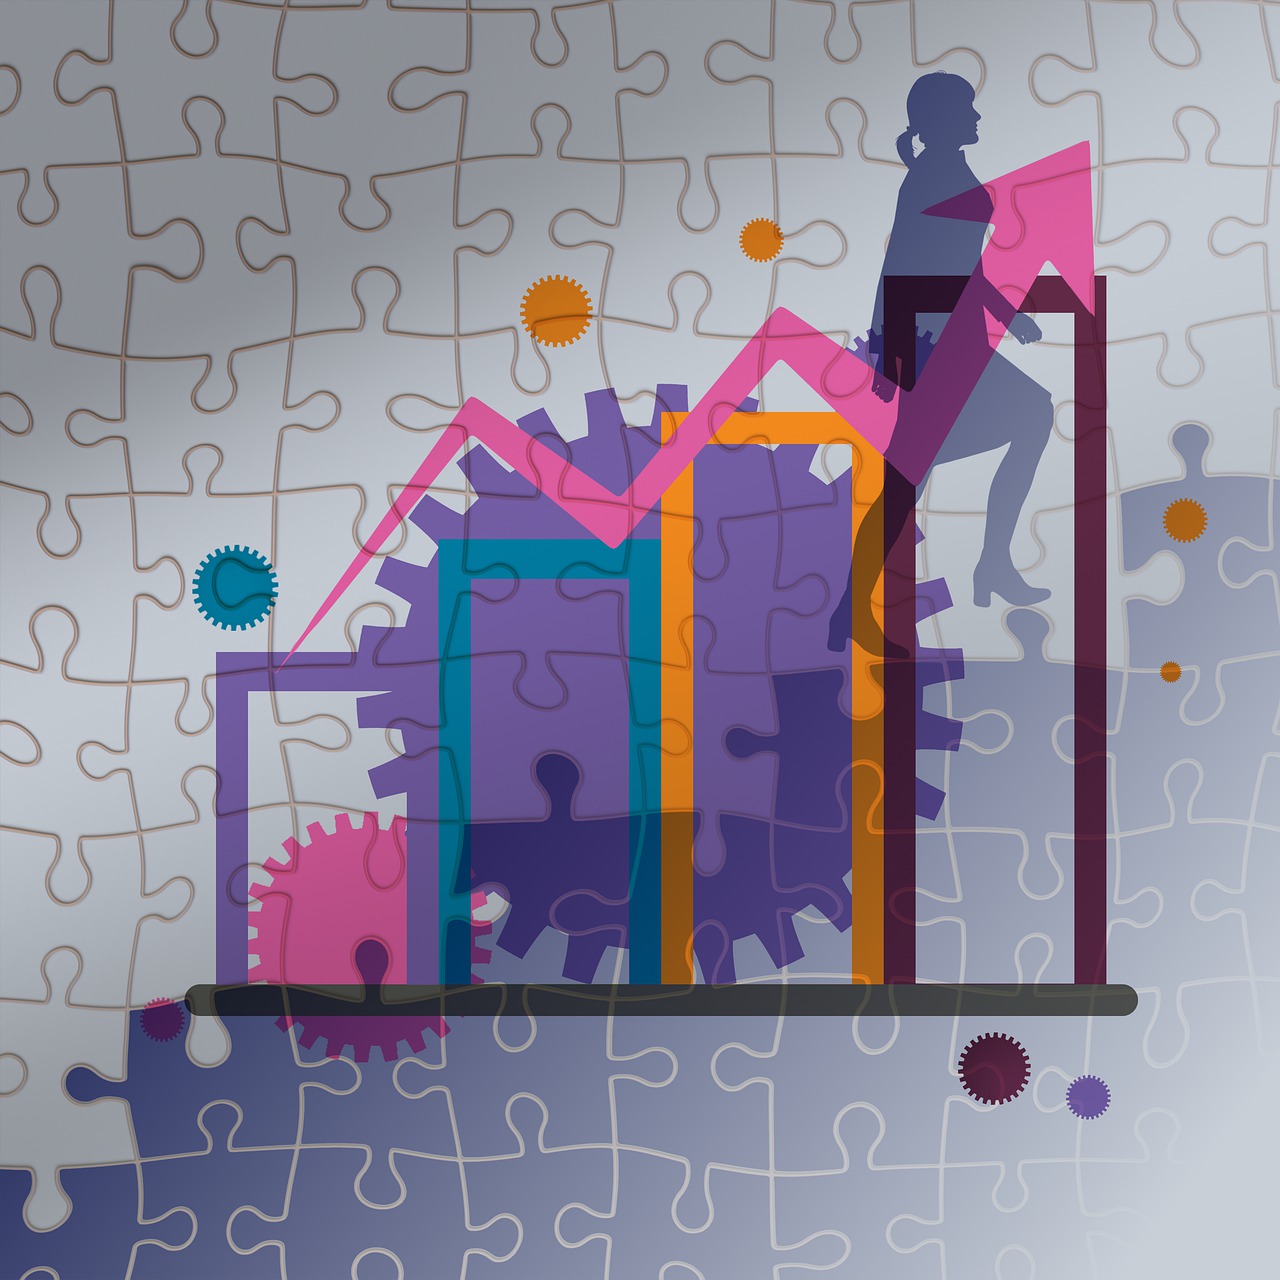 a puzzle piece with a person sitting on top of it, a digital rendering, analytical art, graphs, mechanism, backdrop, editorial illustration colorful